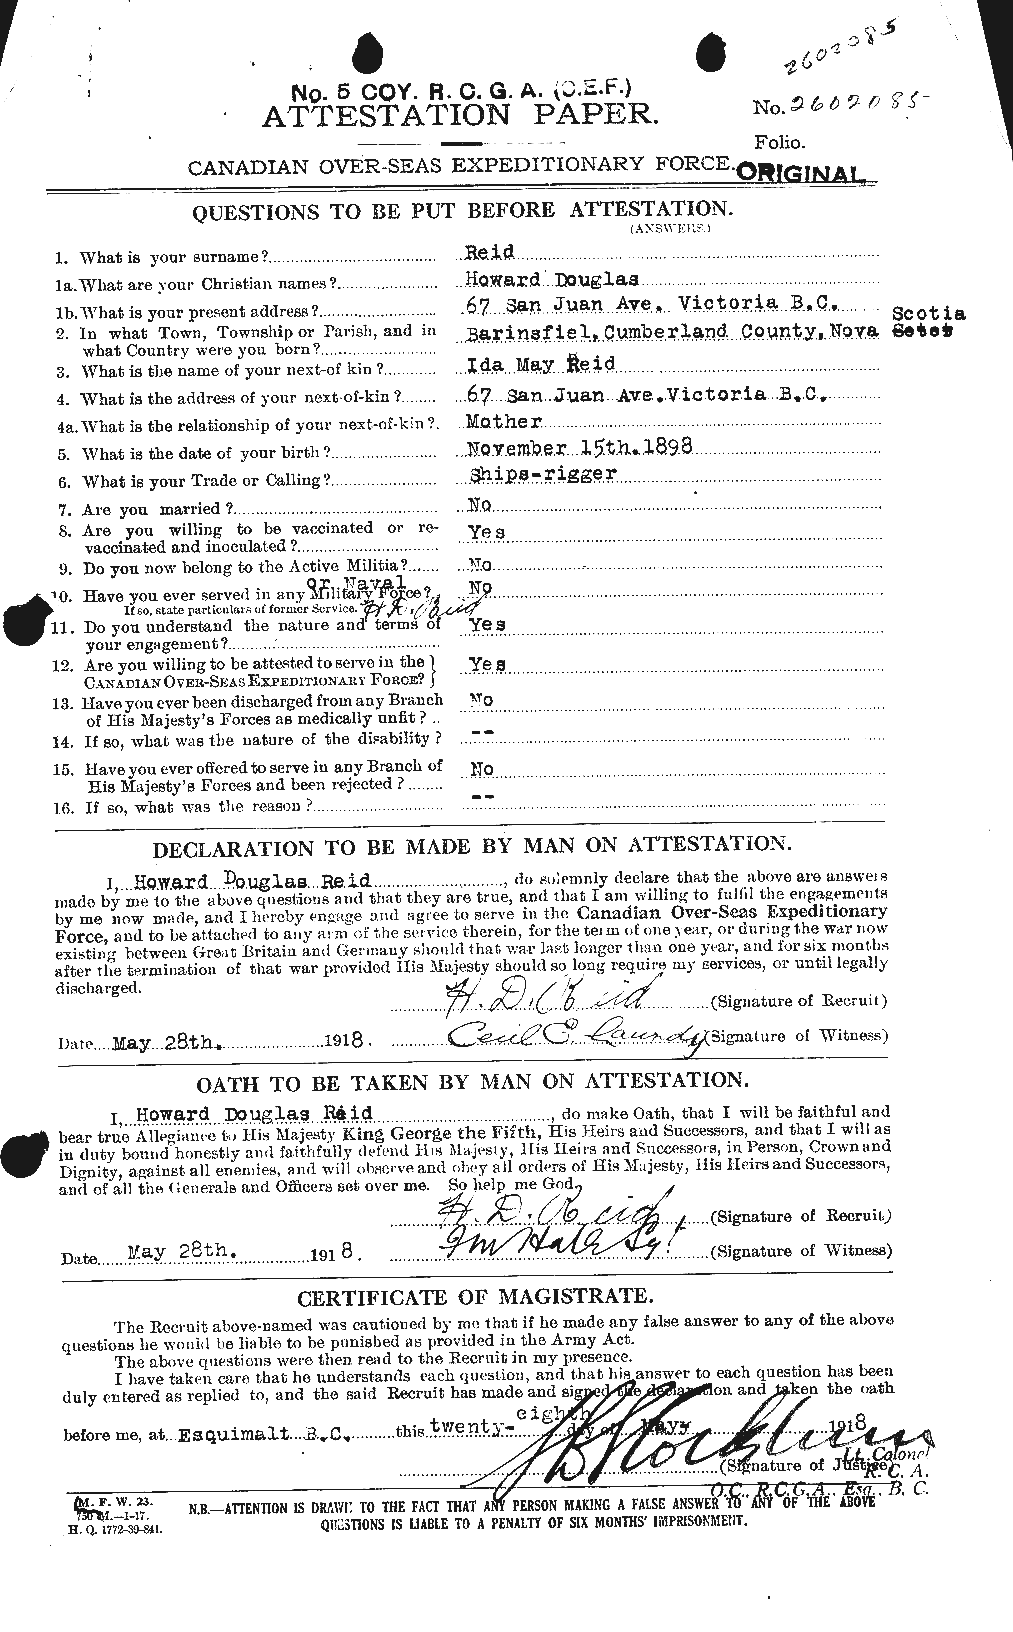 Personnel Records of the First World War - CEF 598619a